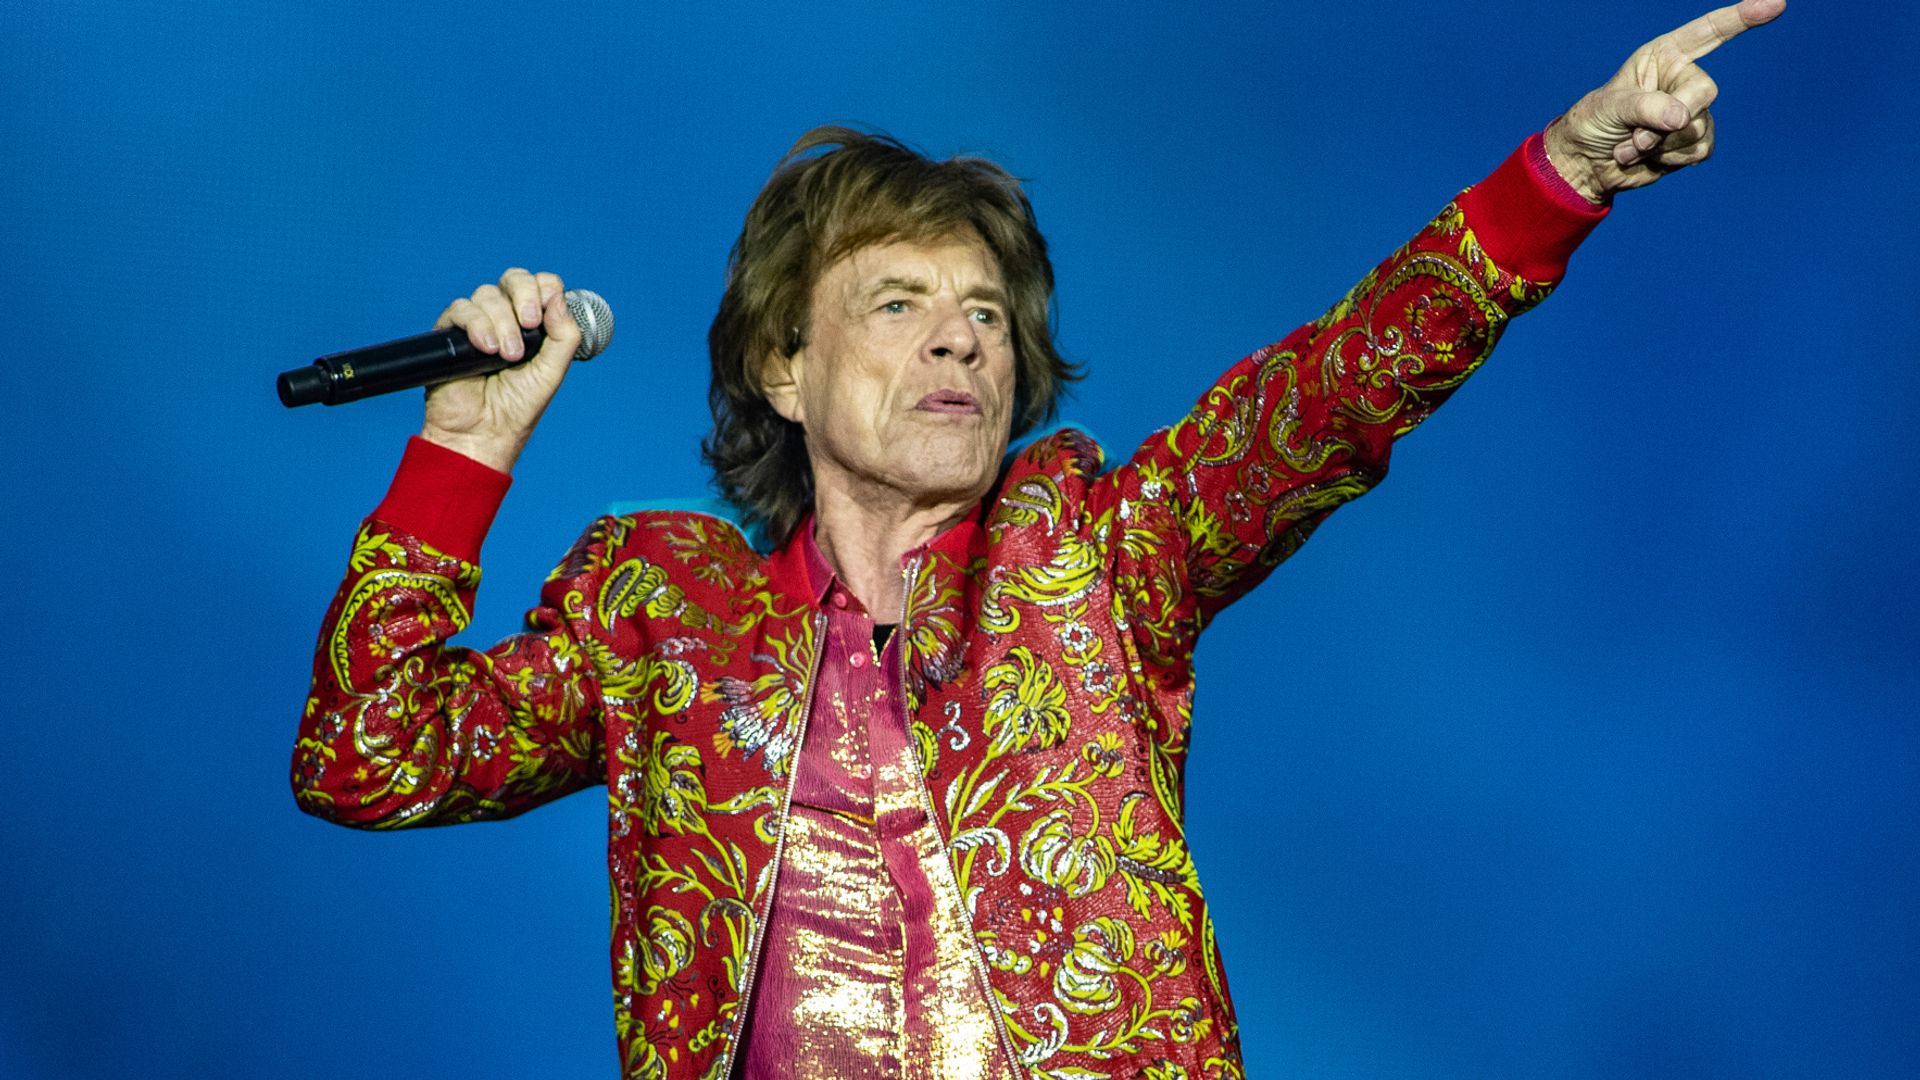 Mick Jagger on stage performing